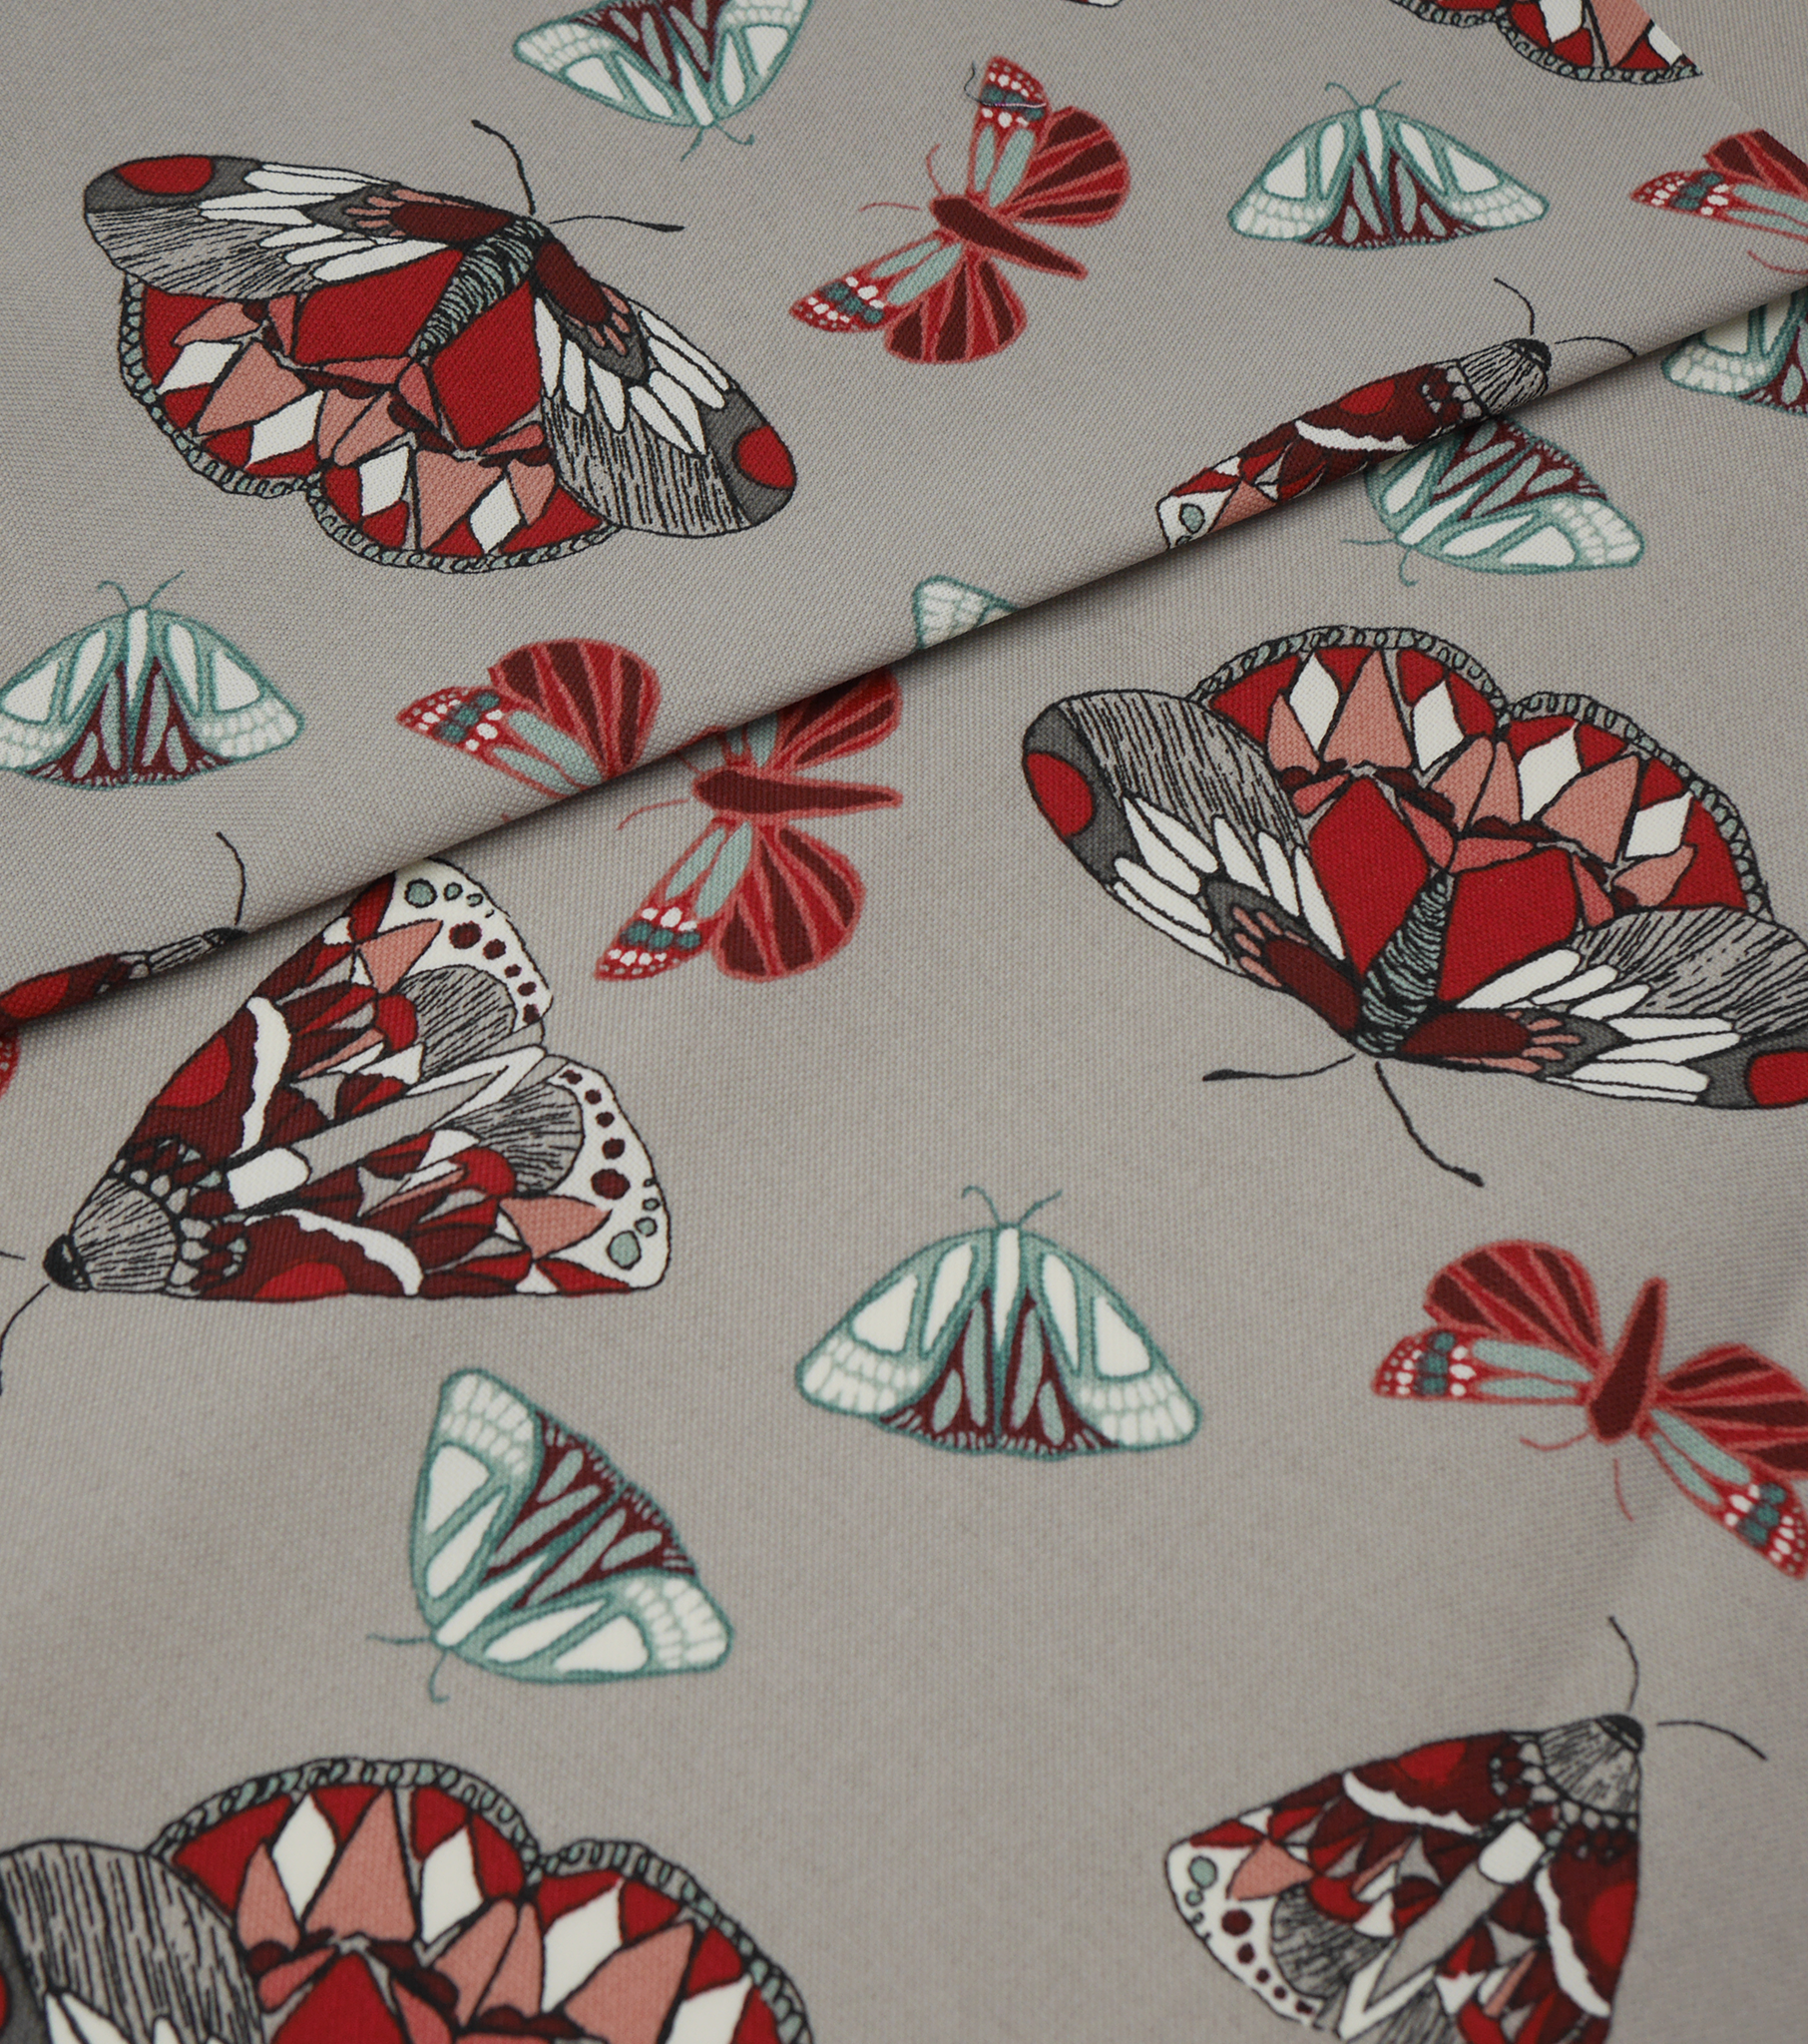 Polyester Outdoor Fabric $12.00p/m - Design #10